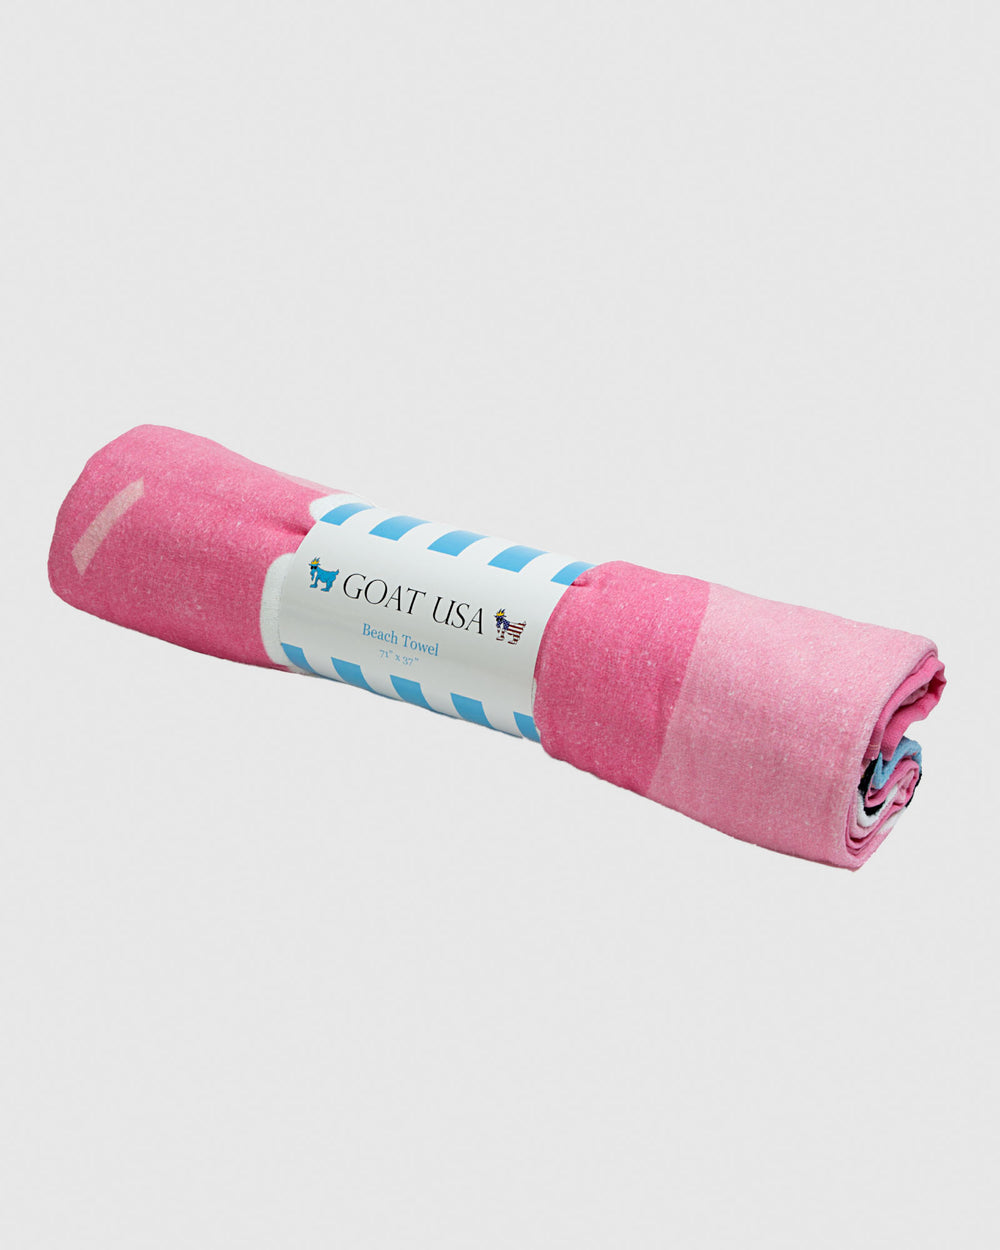 Rolled up pink beach towel